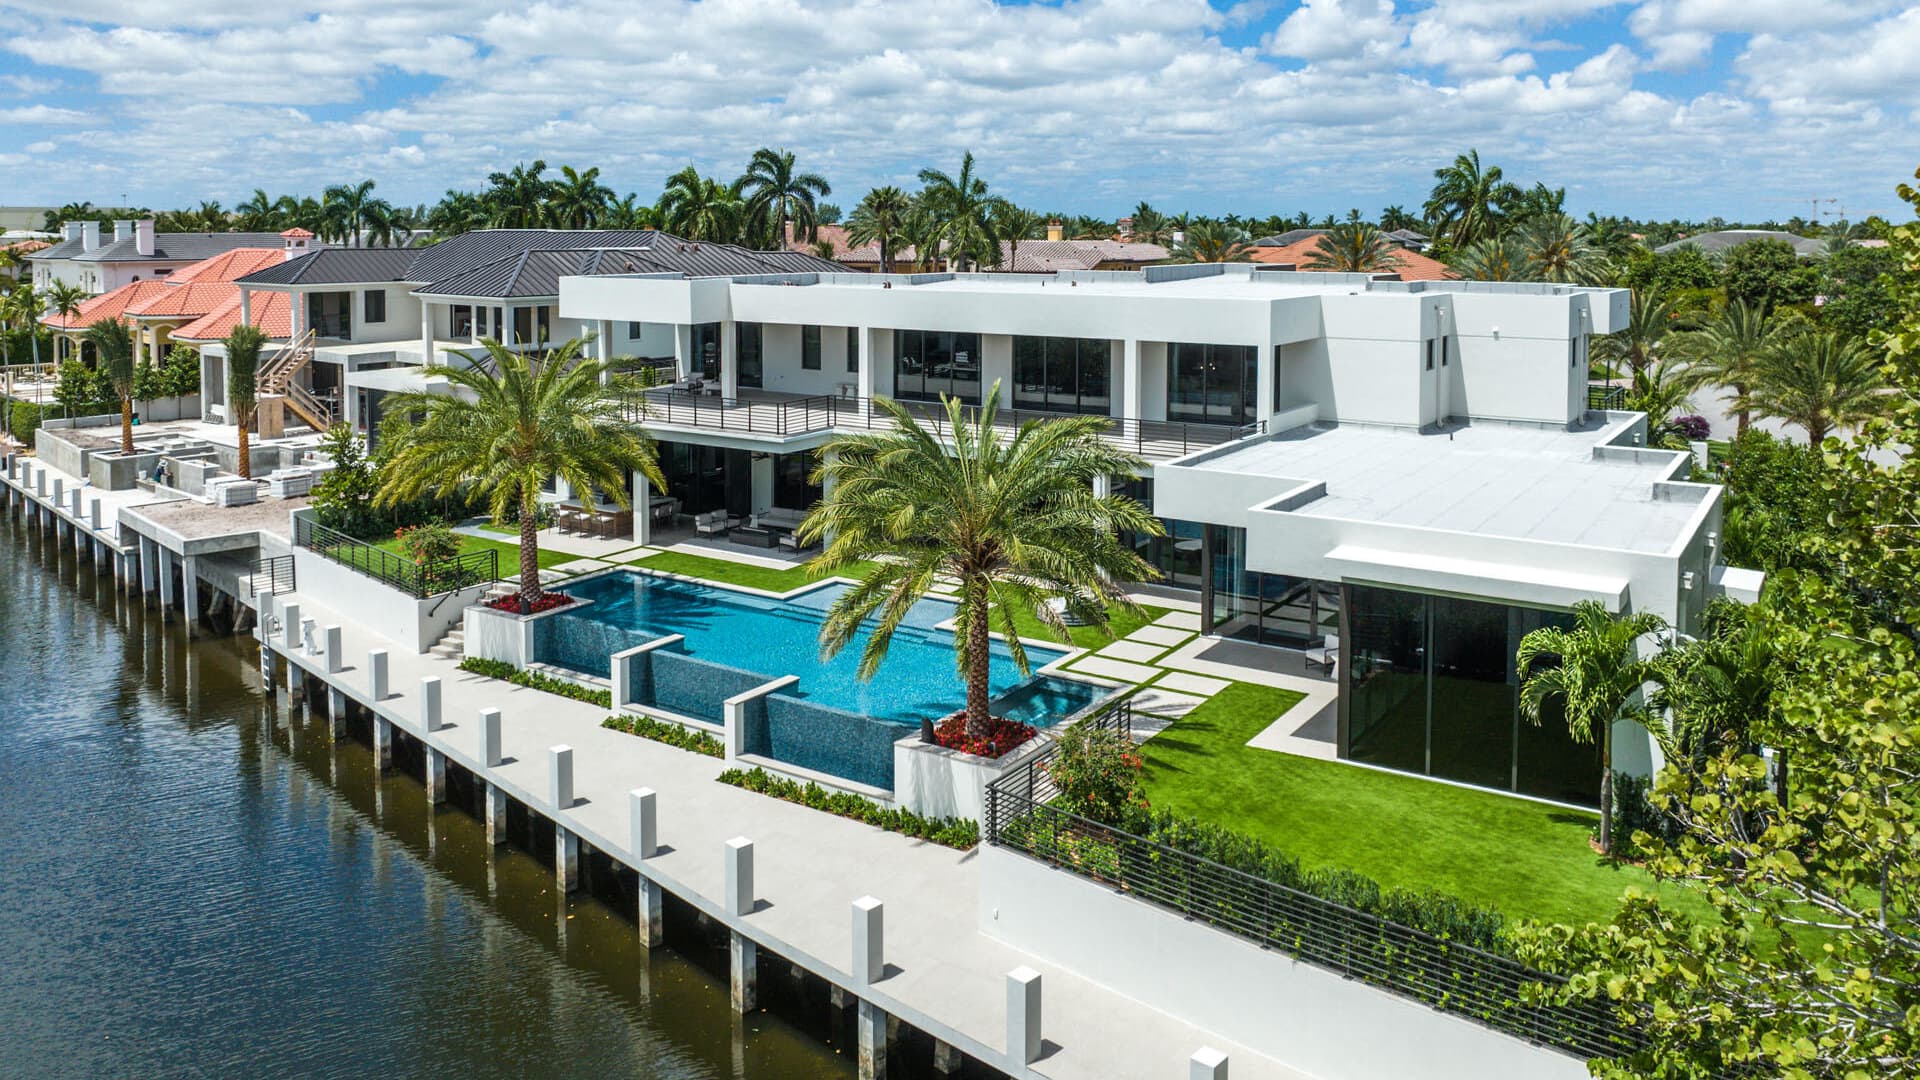 A look inside the Boca Raton mansions commanding Miami Beach prices